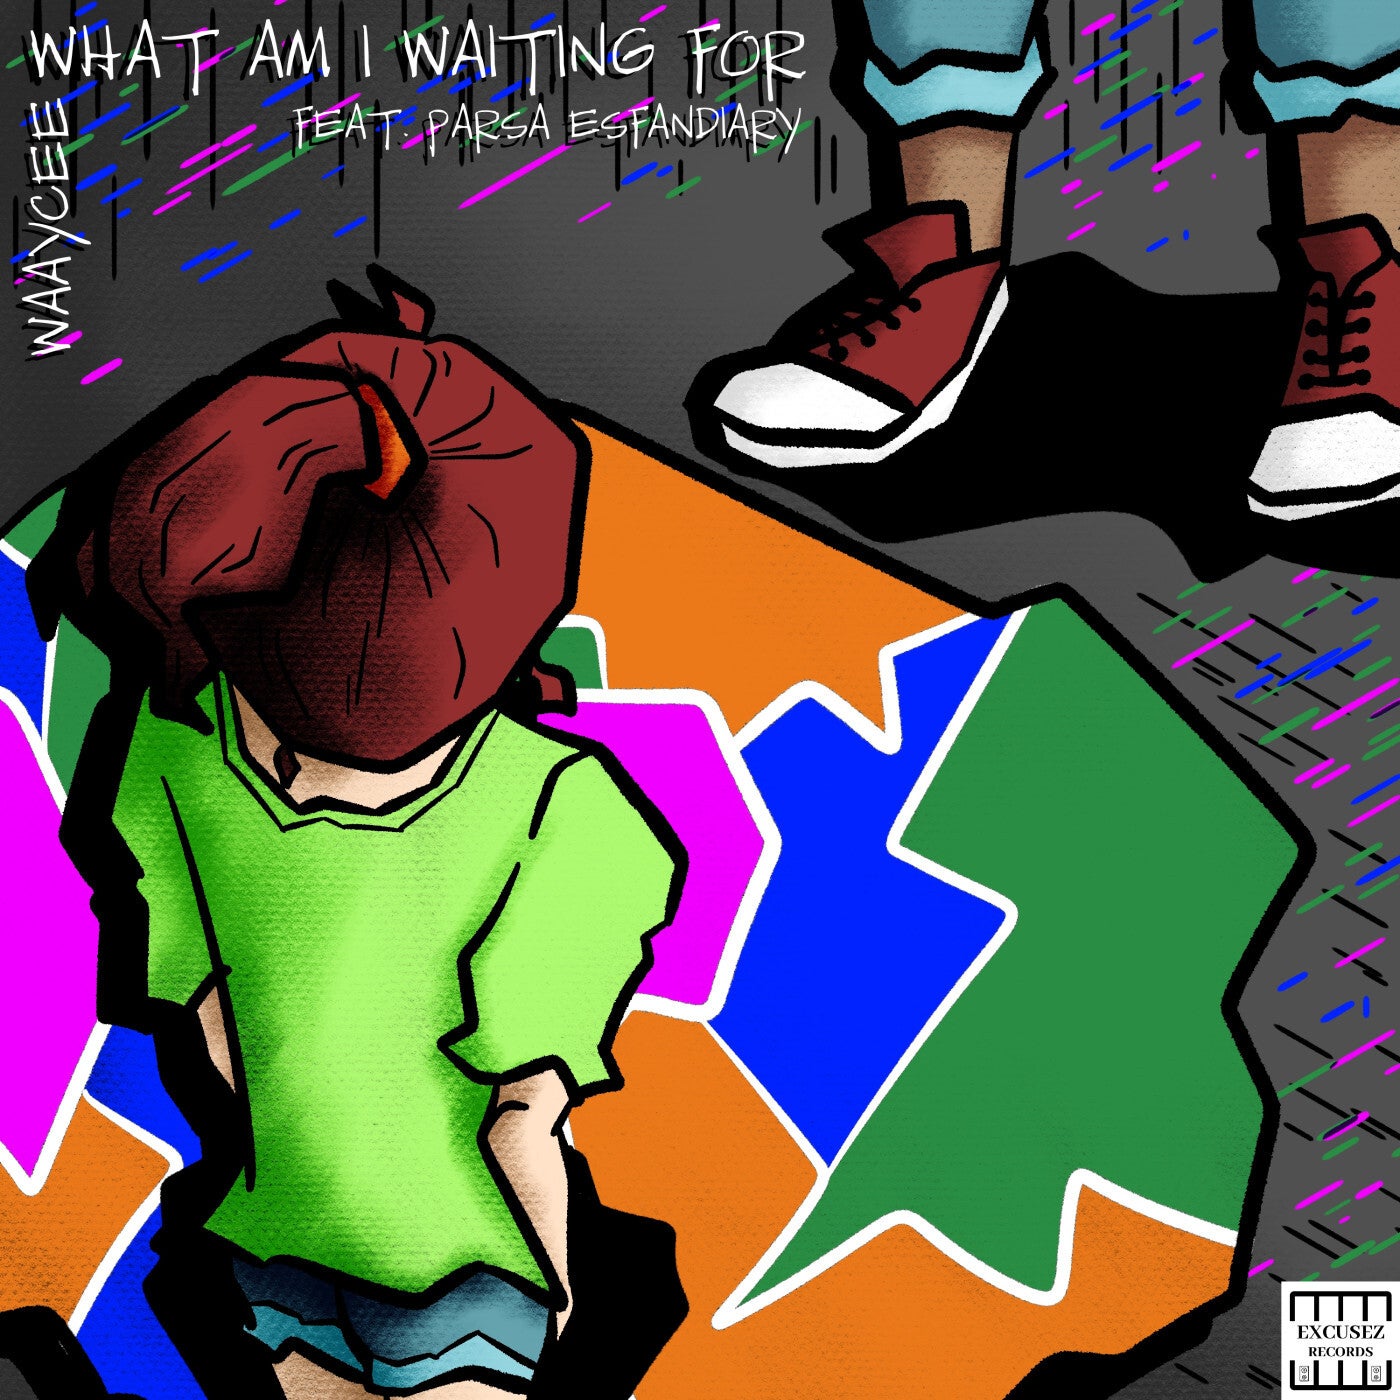 What Am I Waiting For (feat. Parsa Esfandiary)